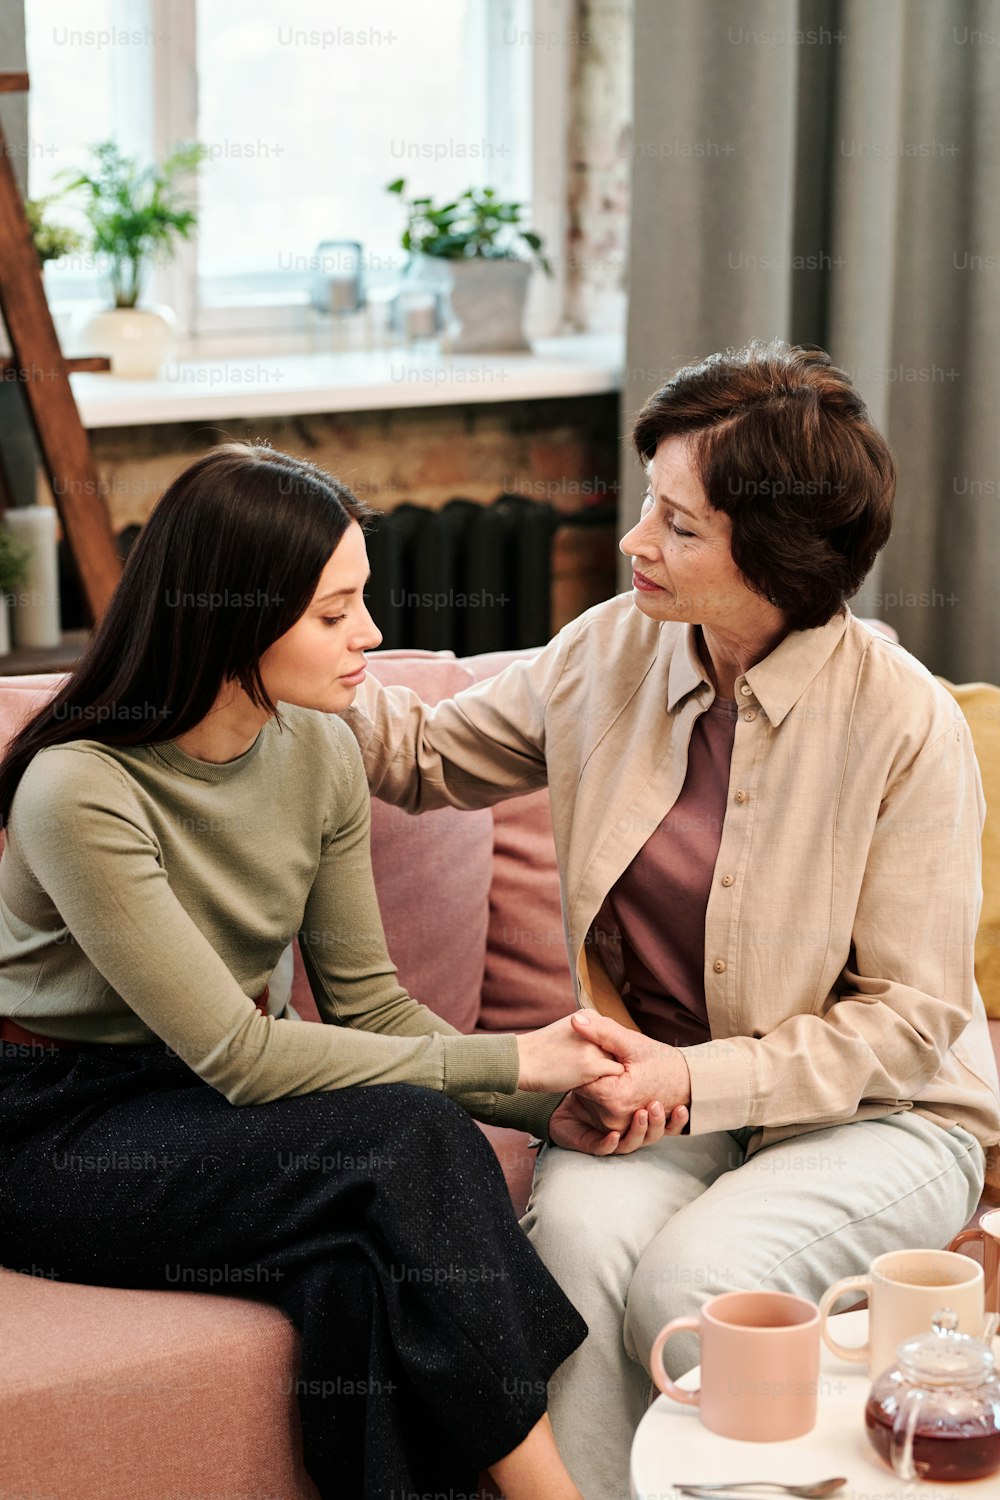 Mature woman comforting her upset daughter in home environment